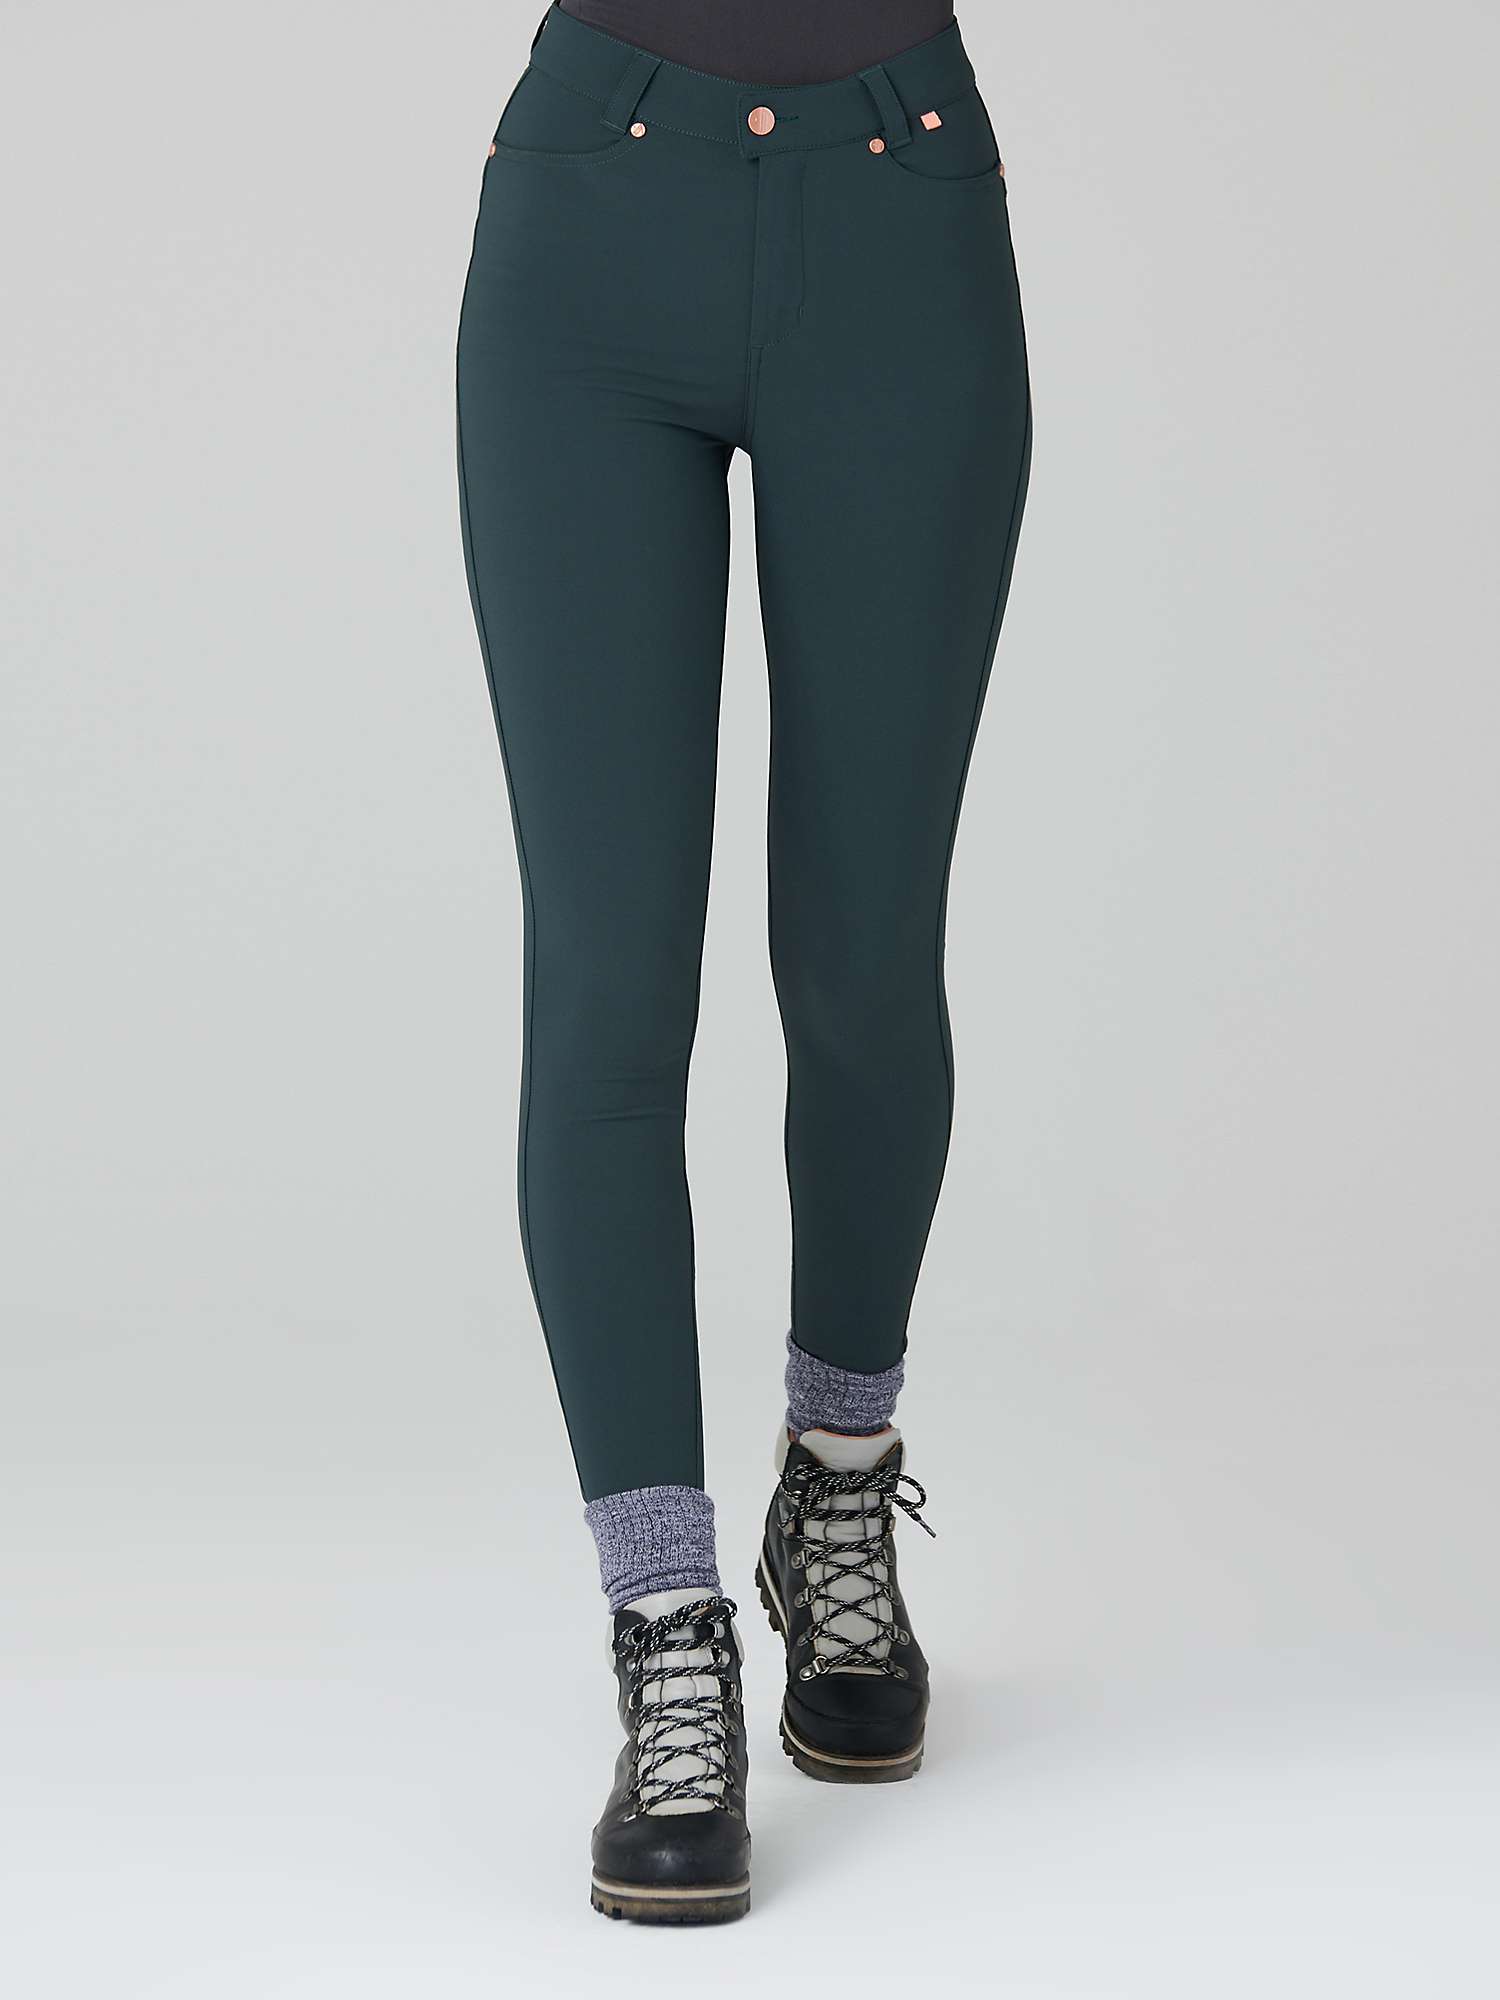 Buy ACAI Thermal Skinny Outdoor Trousers Online at johnlewis.com